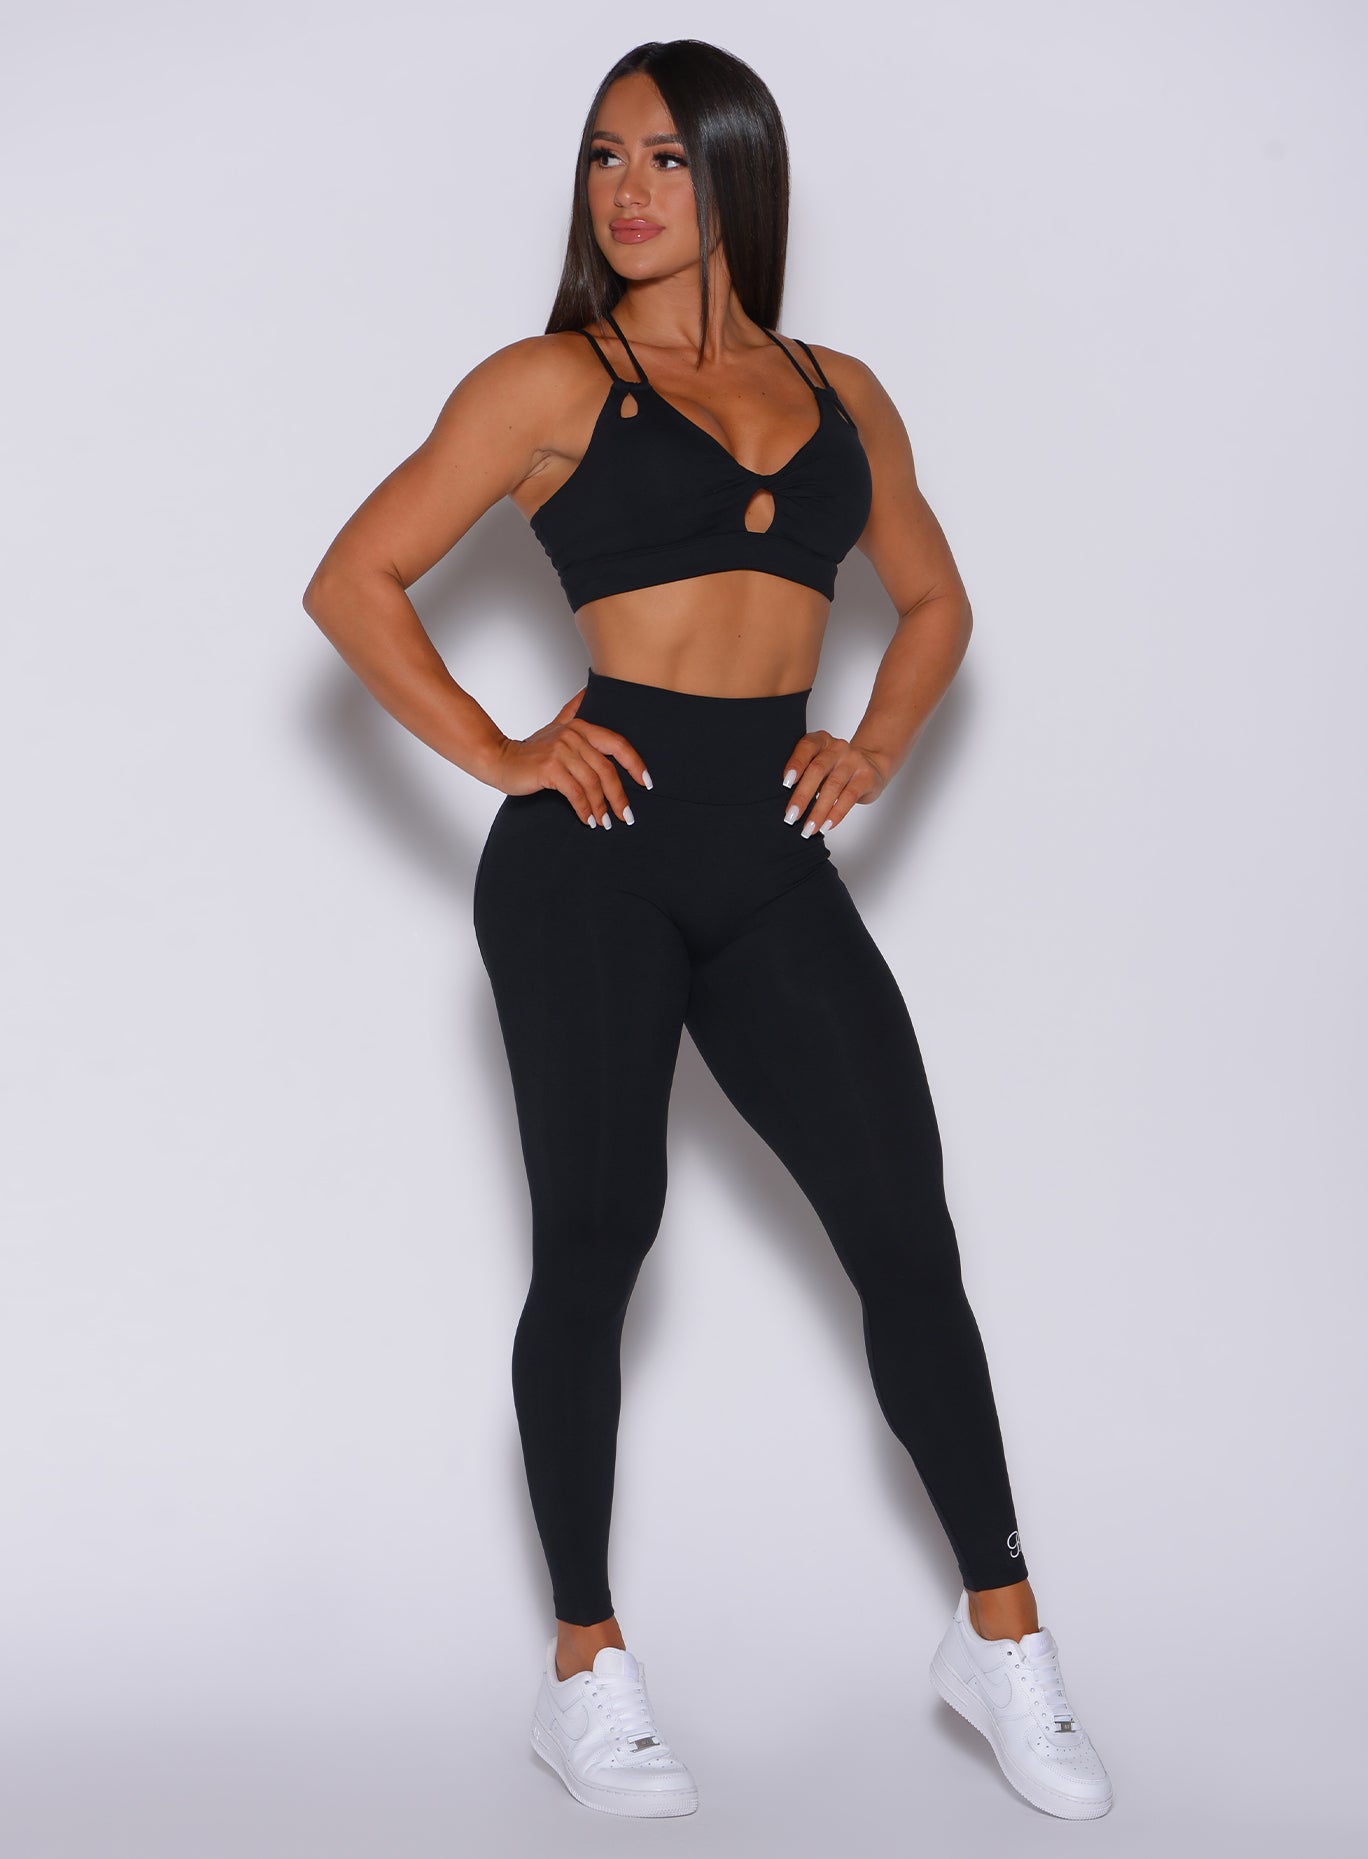 Front profile view of a model wearing our new and enhanced black shape leggings and a matching sports bra